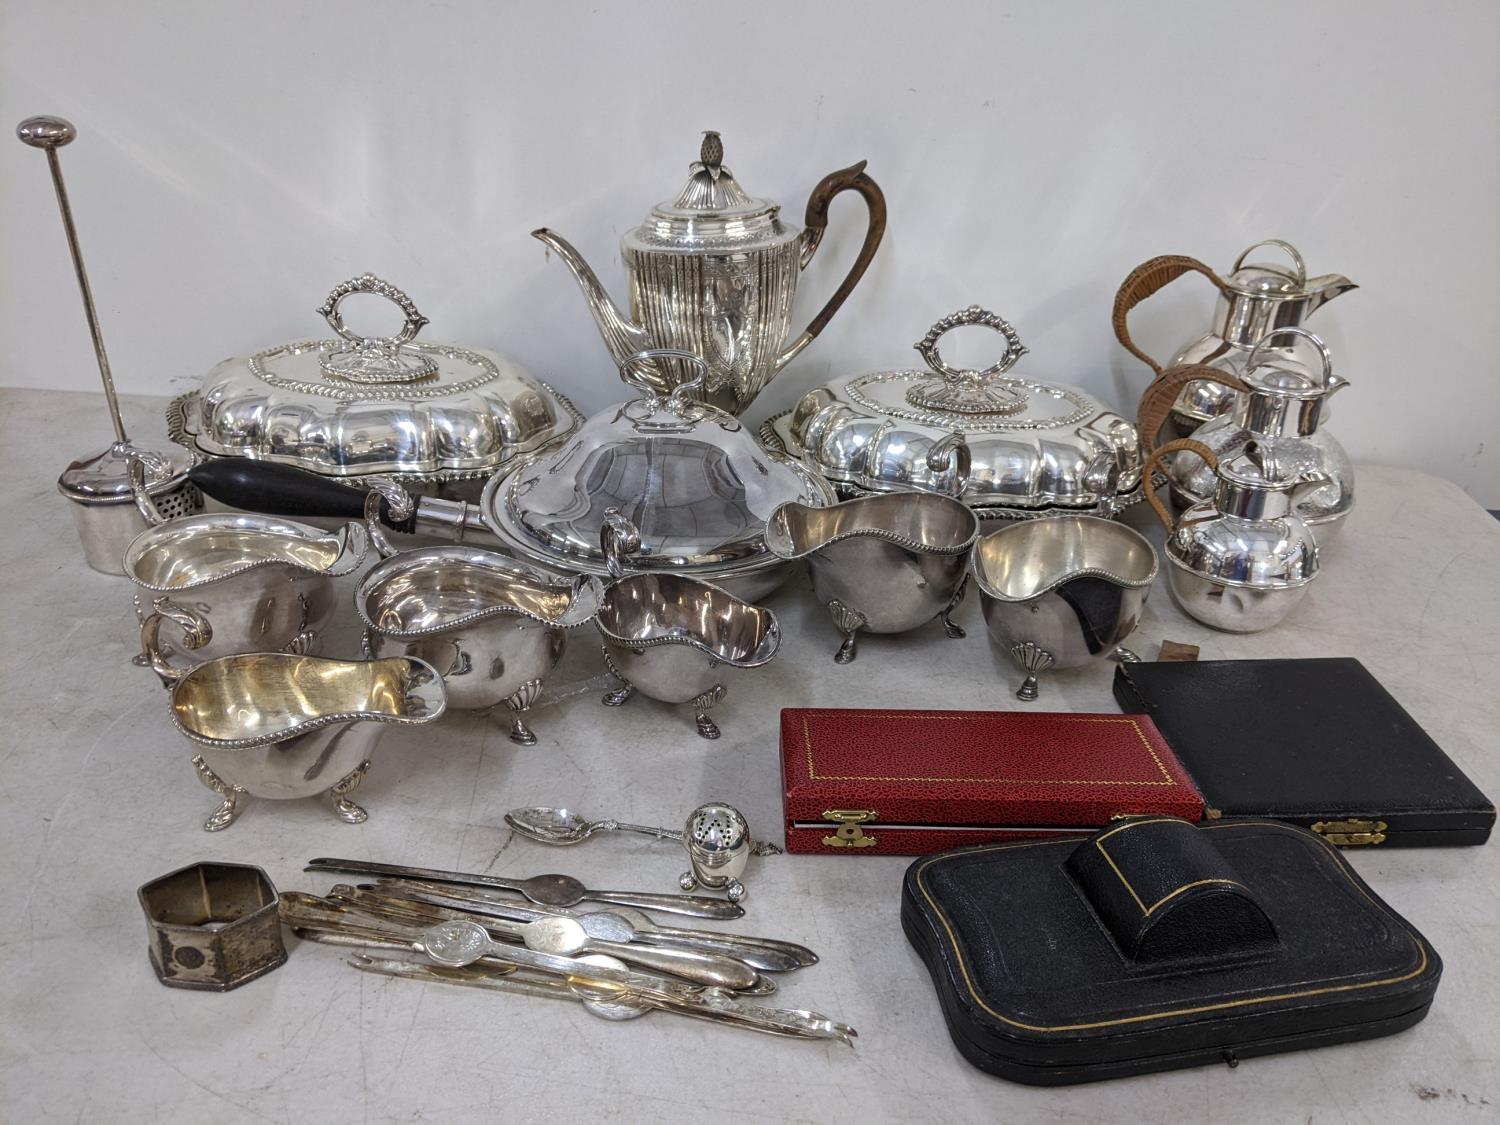 Mixed silver plate to include a teapot, pair of entrée dishes, sauce boats and other items, together